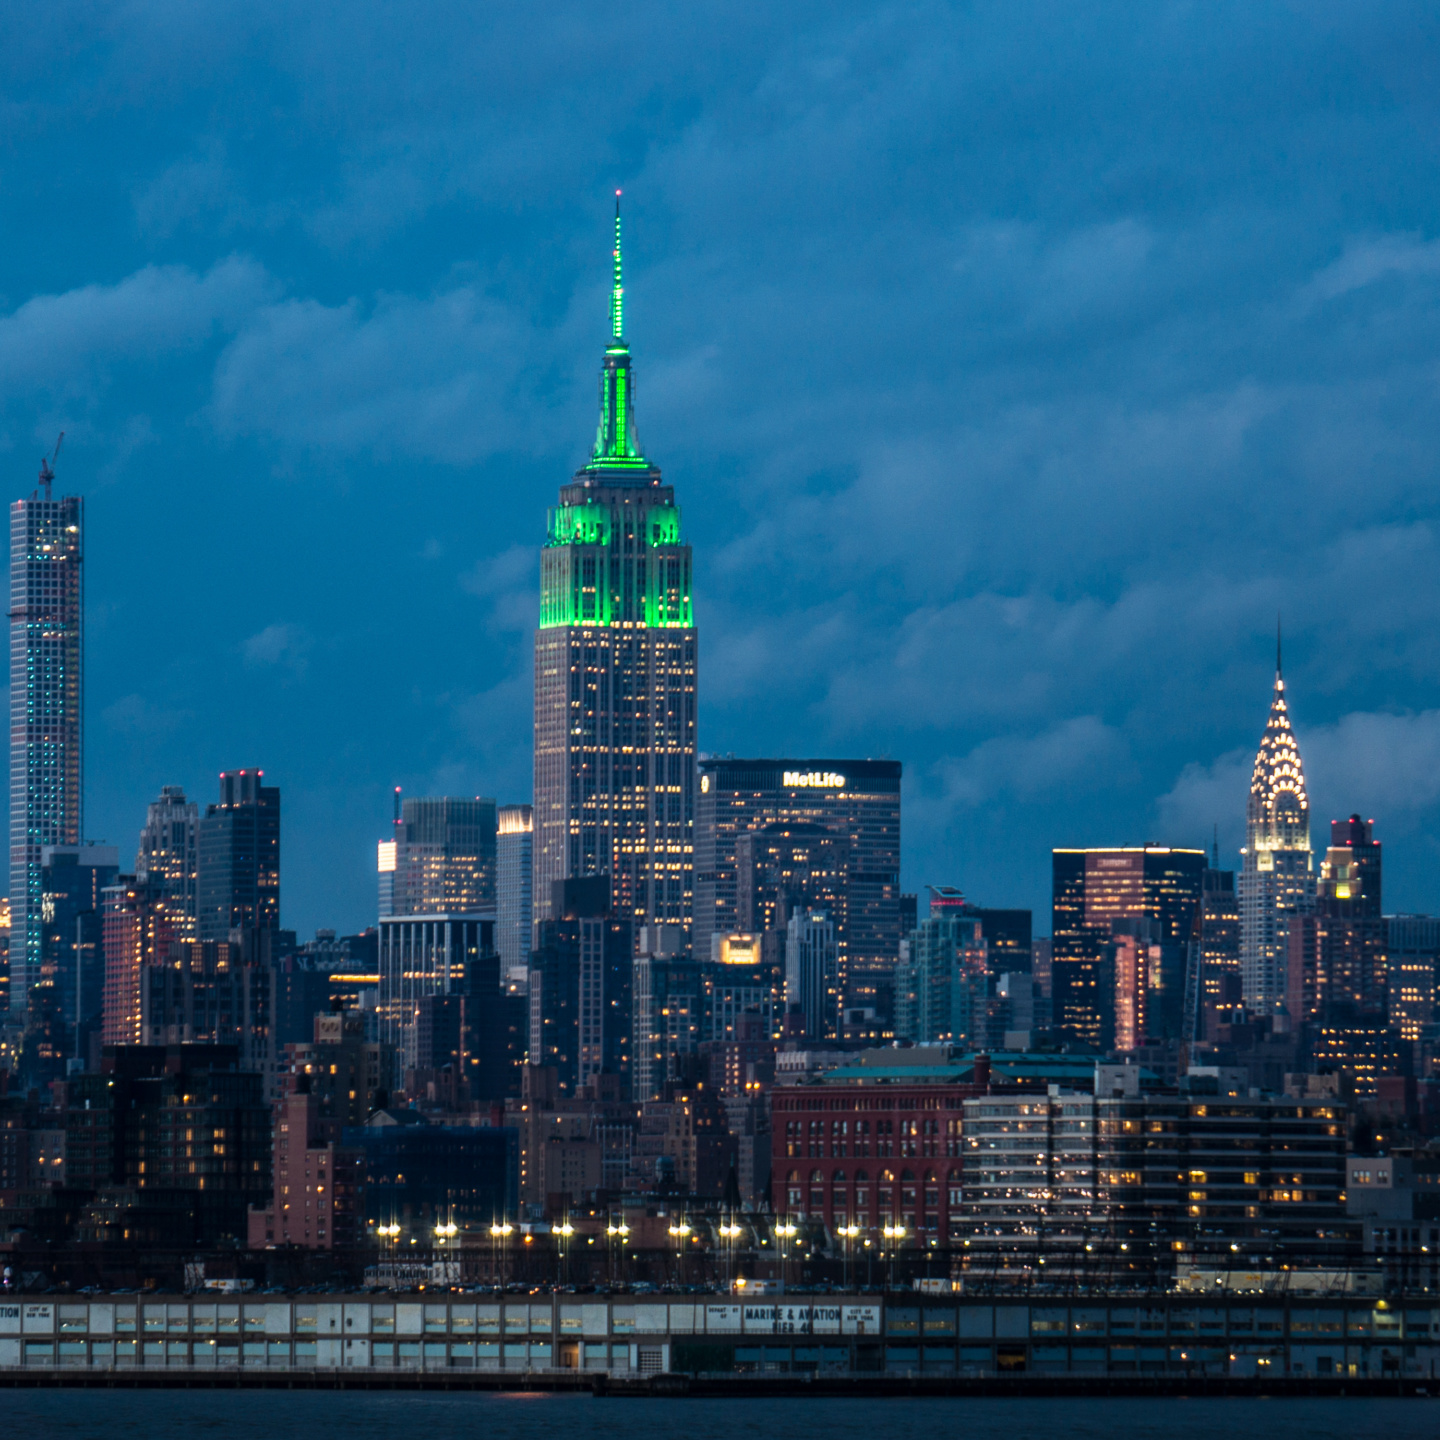 Focal Point: 10 Pictures of the Empire State Building